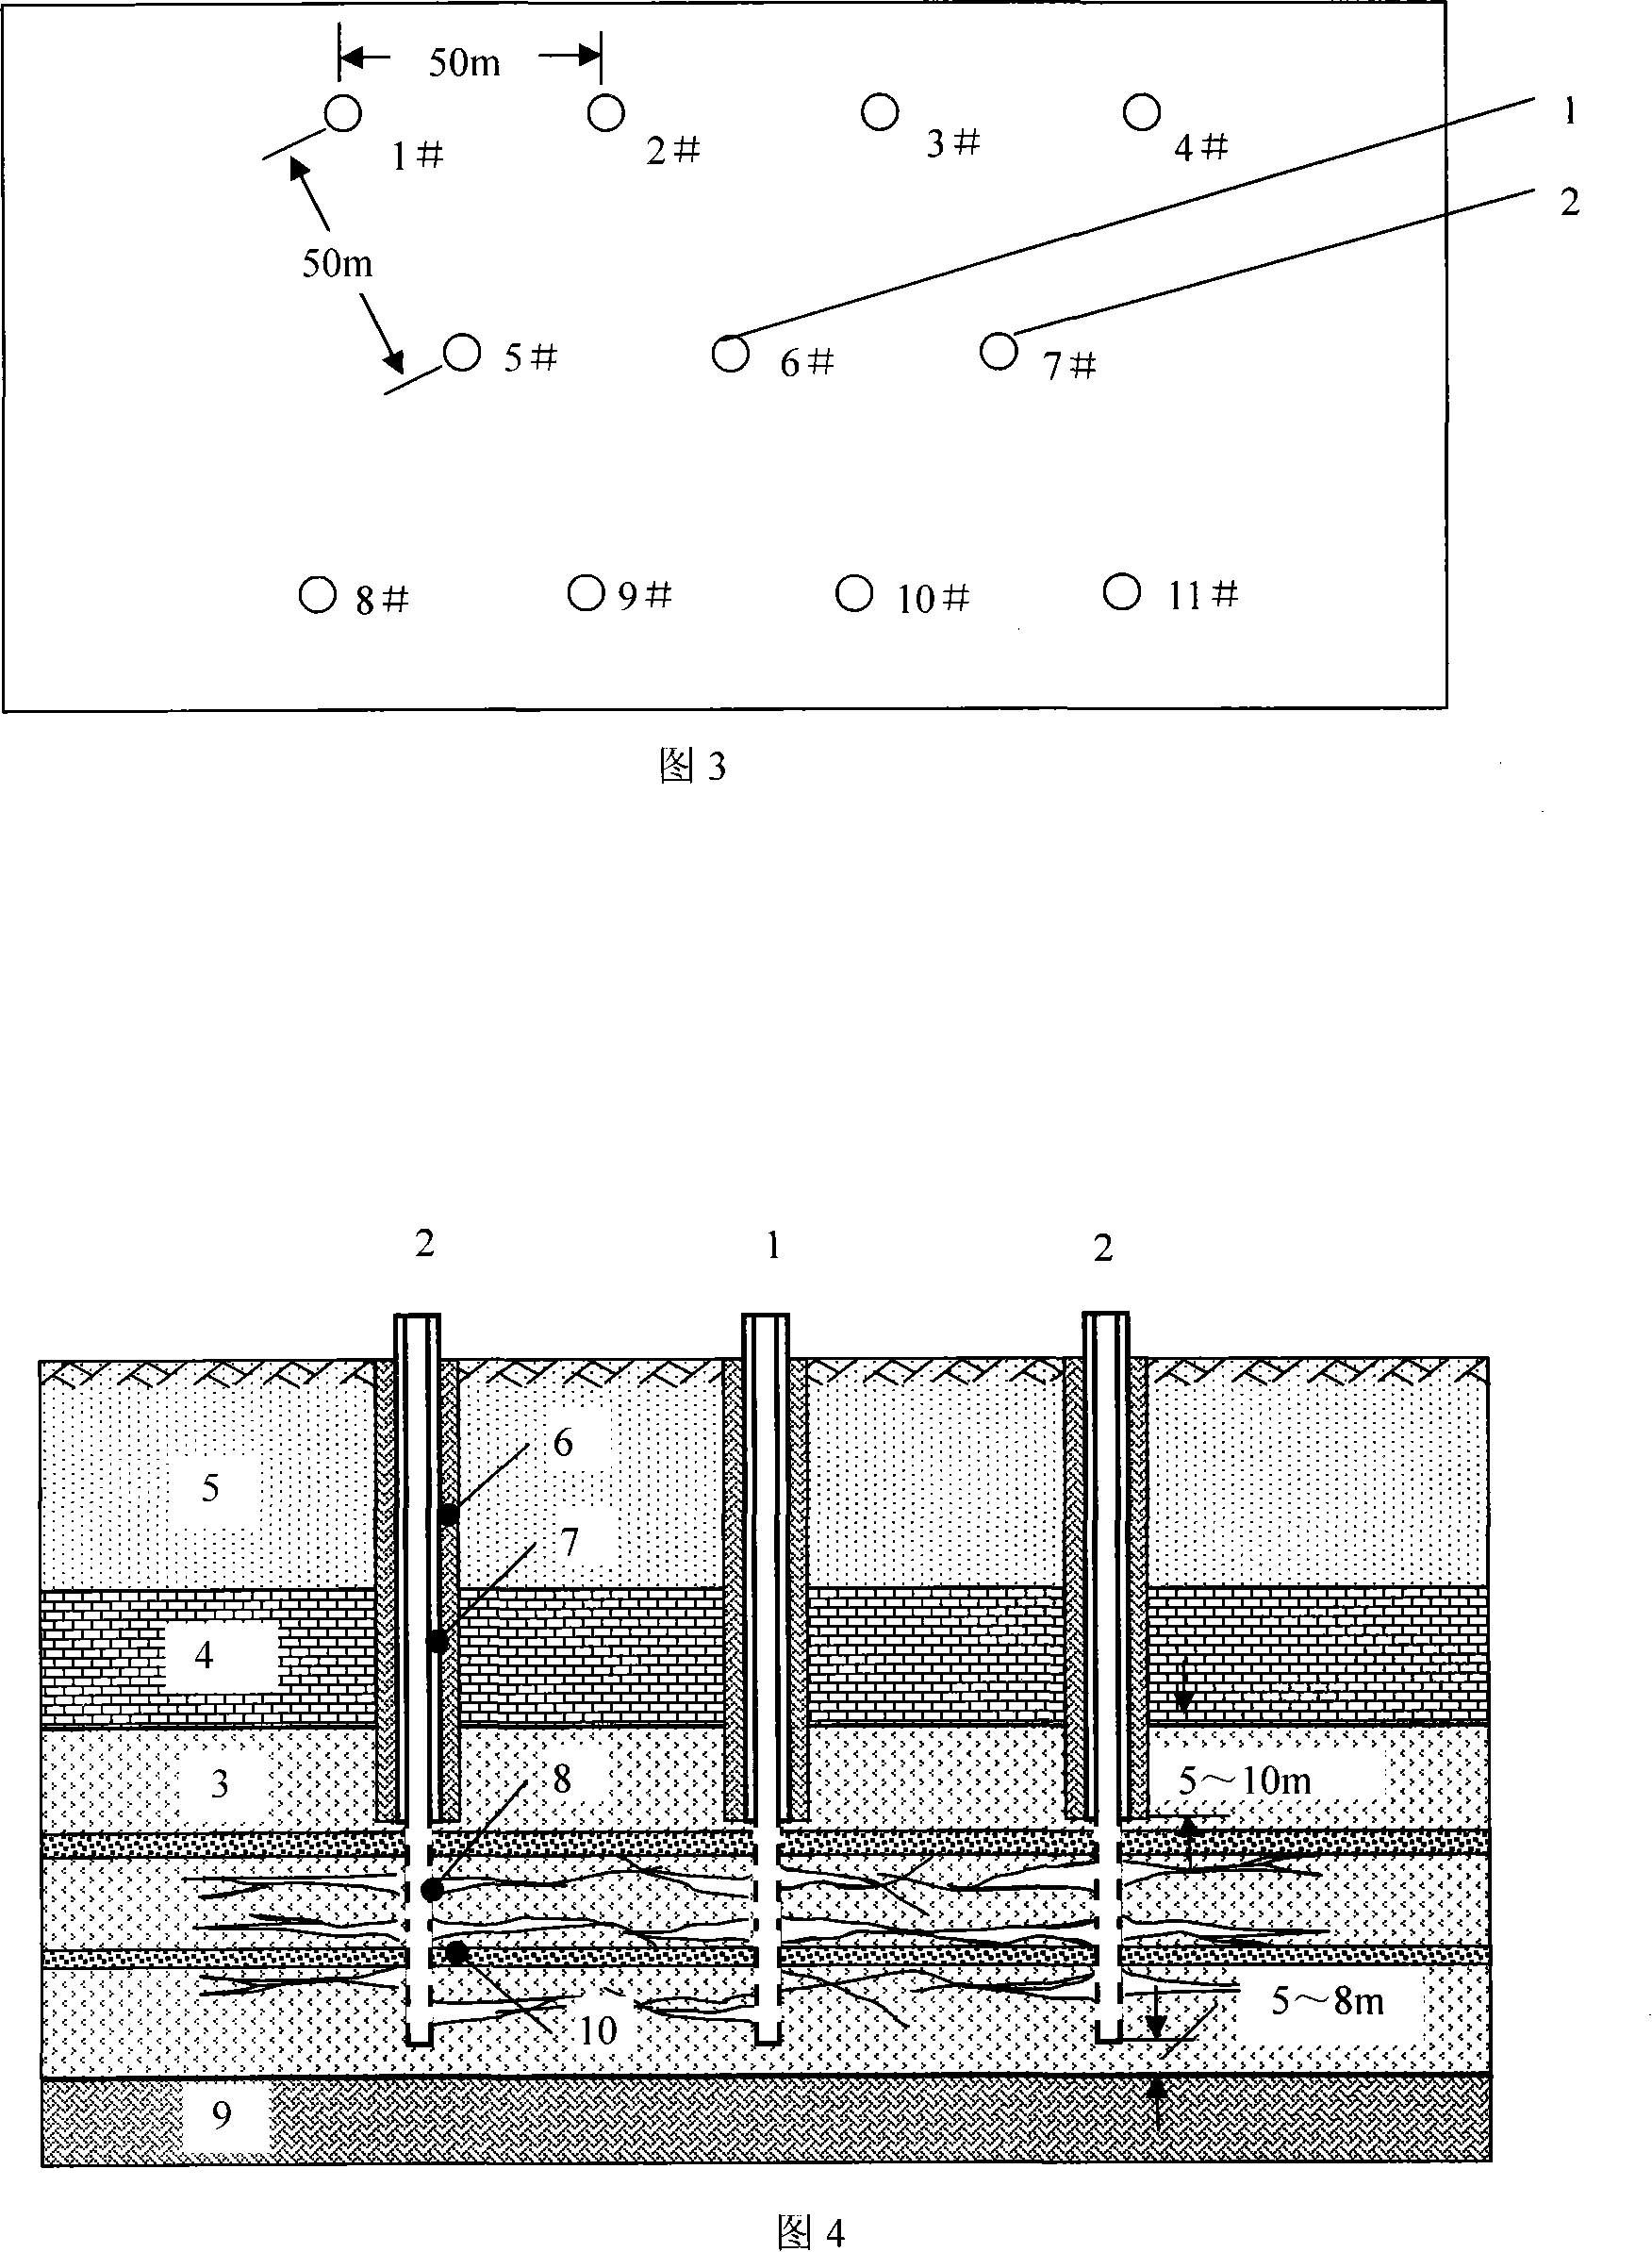 Method of high temperature hydrocarbon gas convection heating oil shale for exploiting oil gas